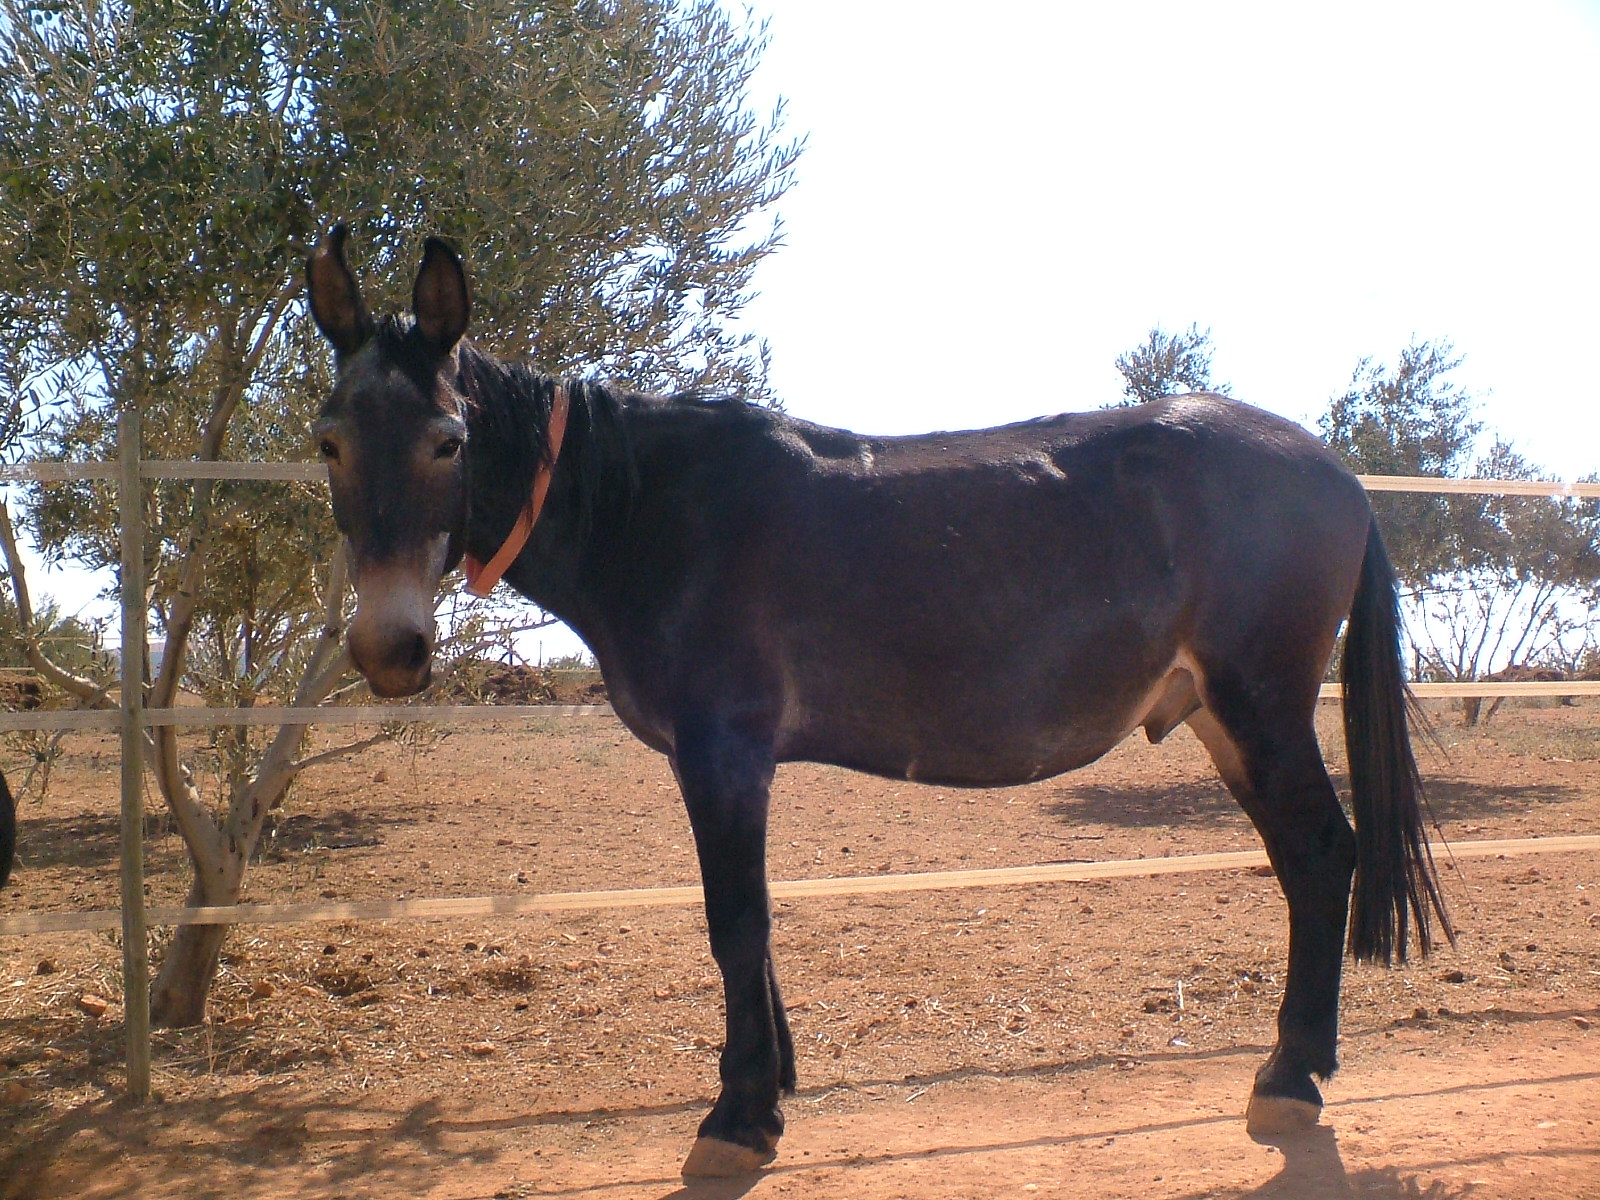 An unsaddled mule showing typical mule conformation